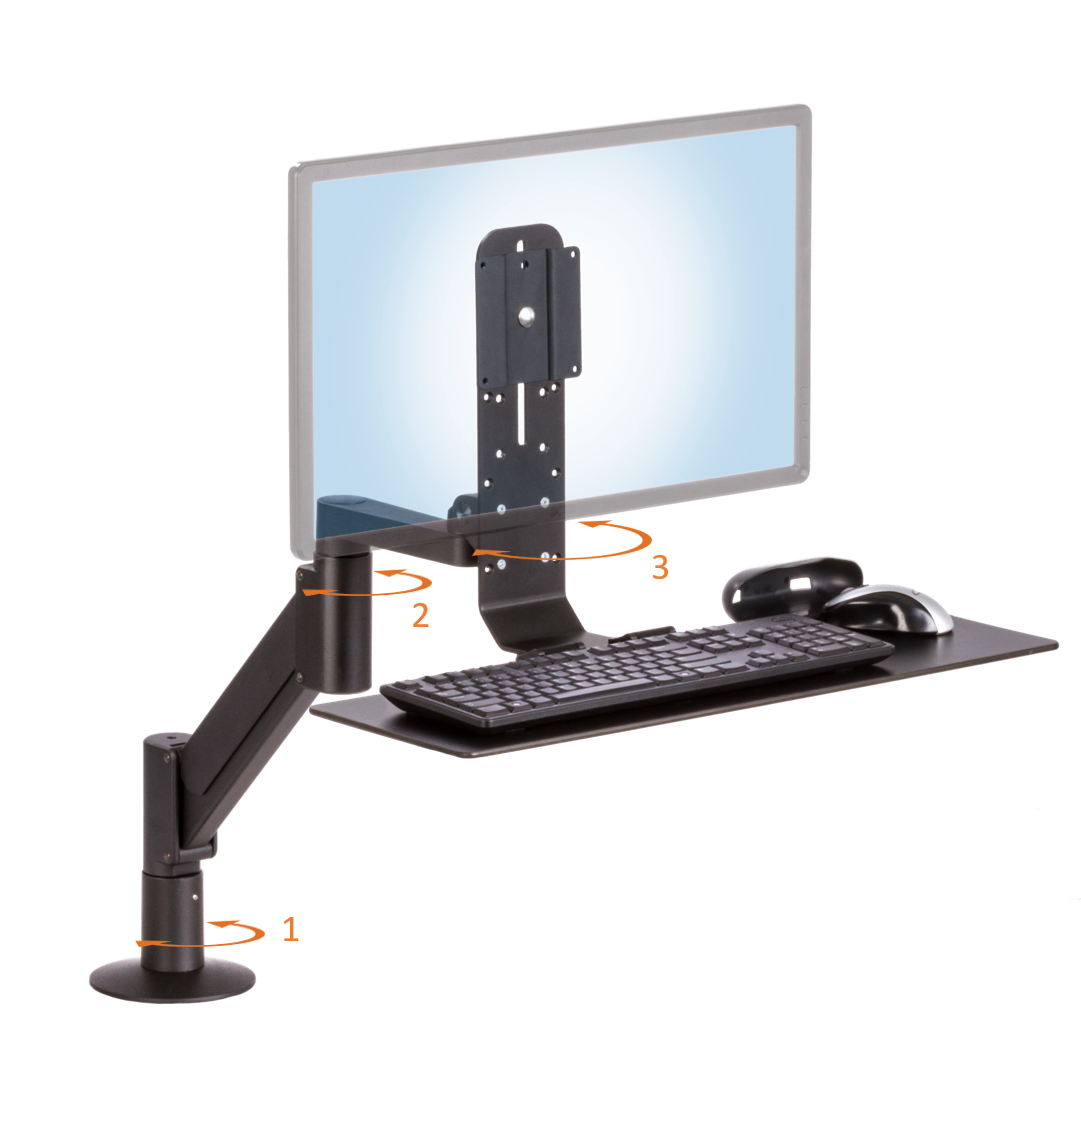 SERIES-118 workstation keyboard and monitor mount pivoting points of adjustment